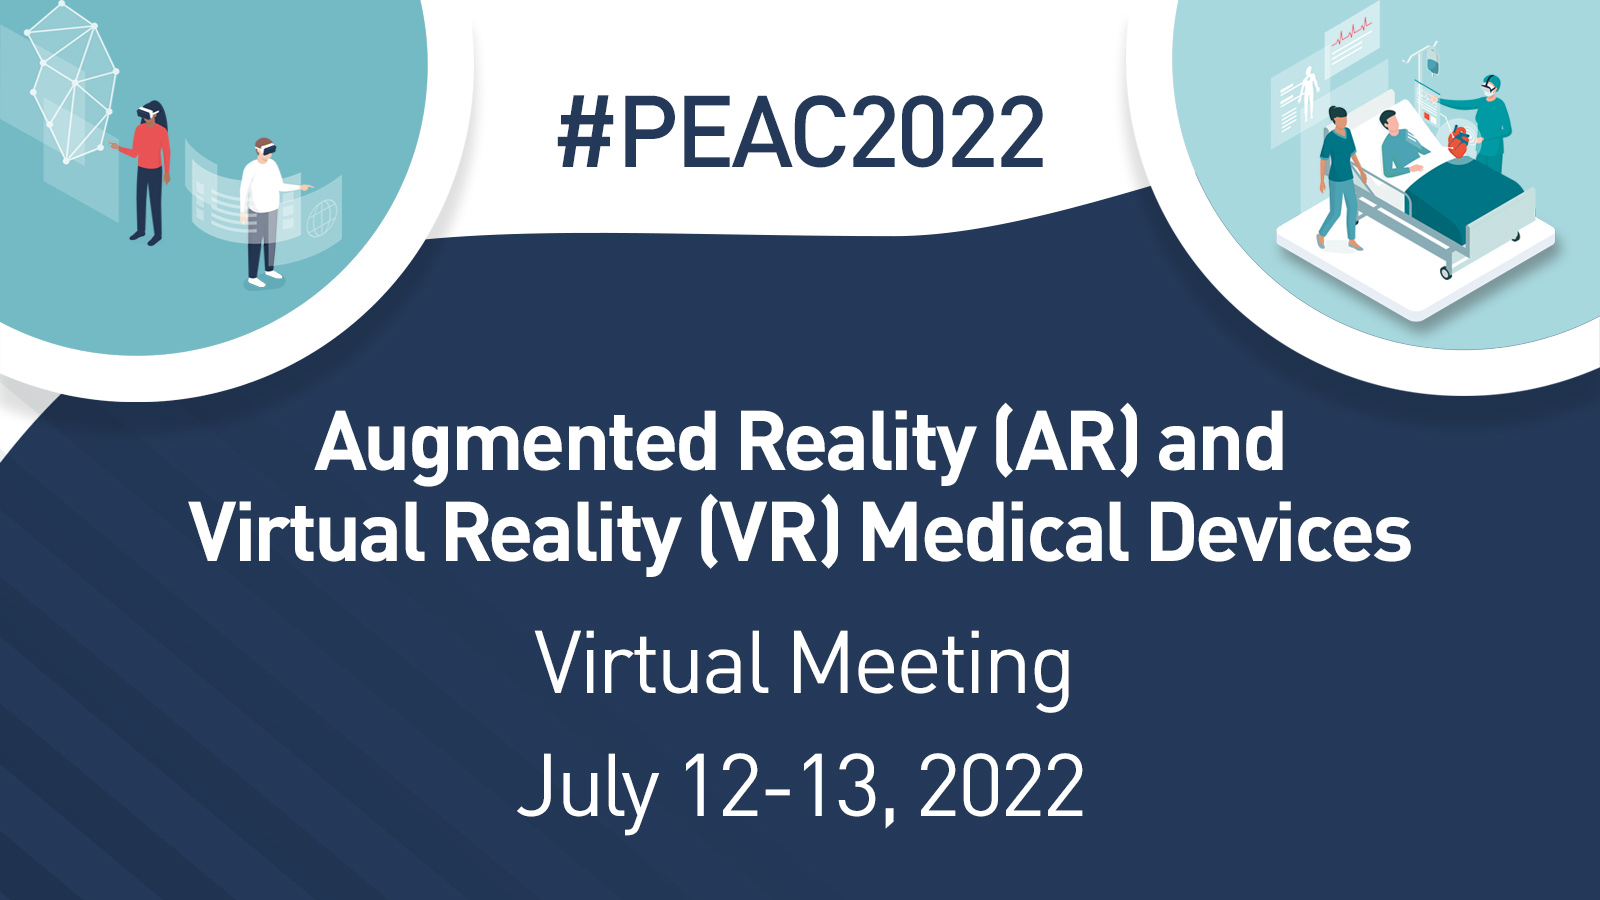 #PEAC2022 - Augmented Reality (AR) and Virtual Reality (VR) Medical Devices - Virtual Meeting July 12-23, 2022